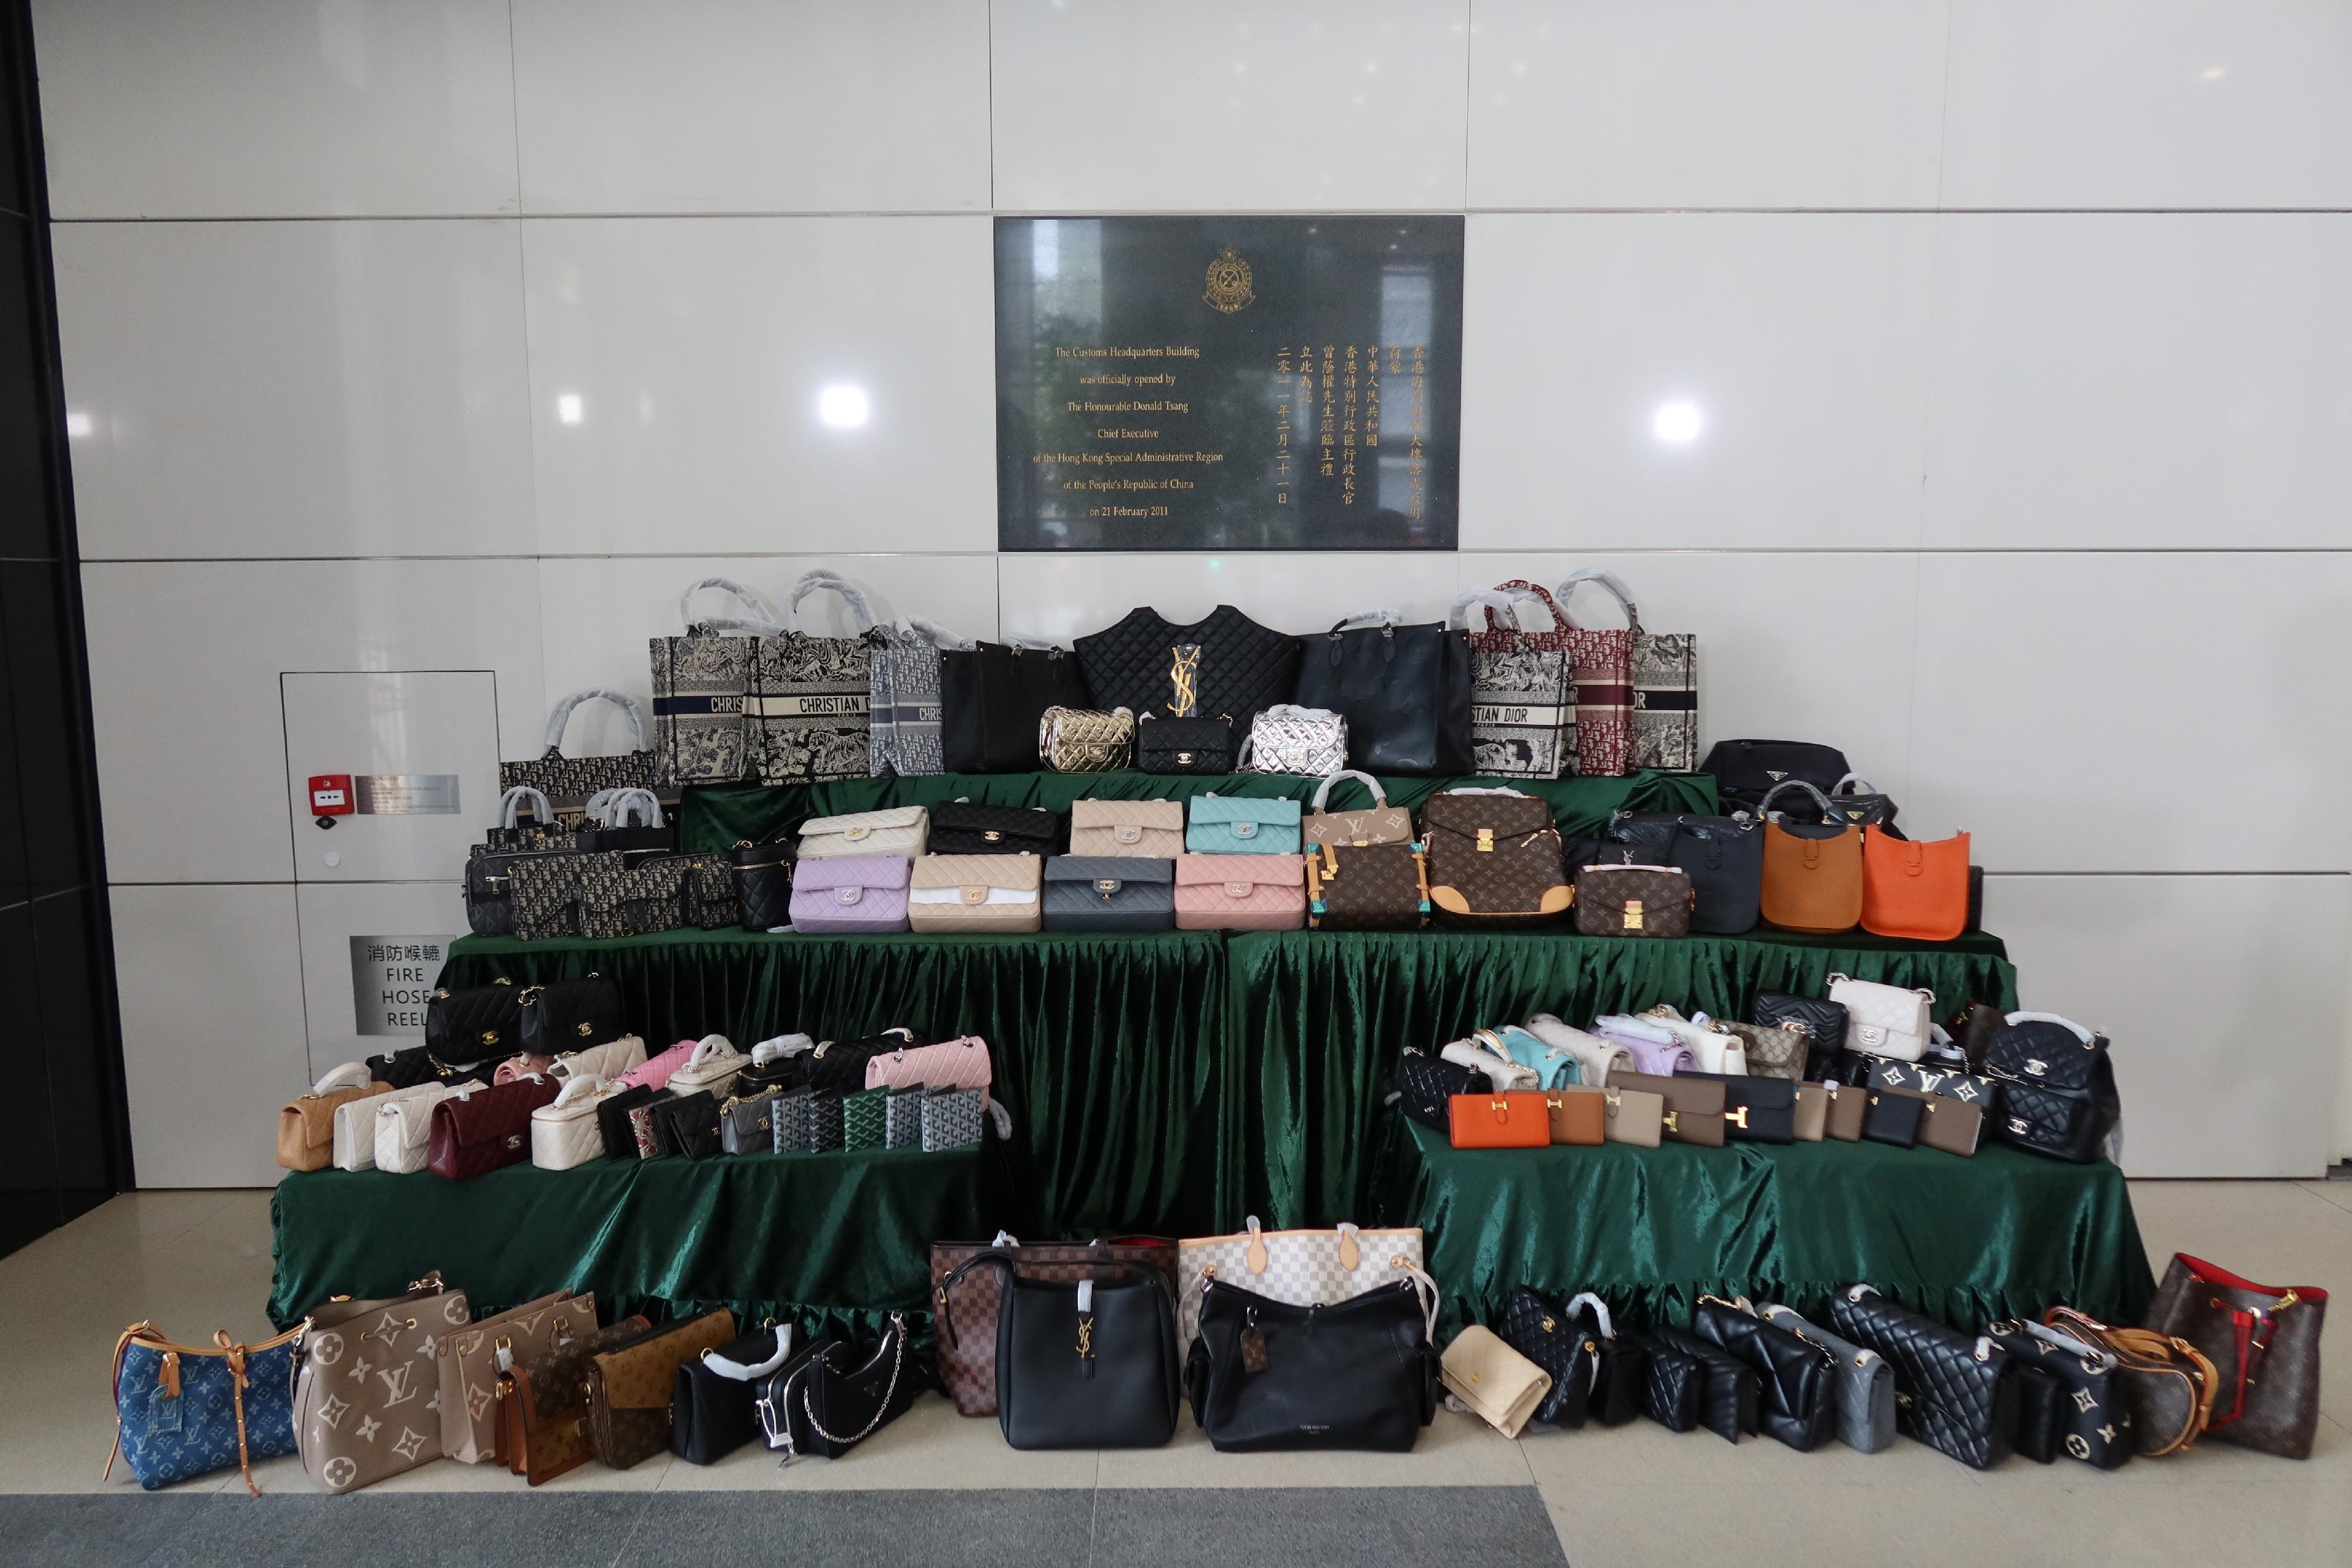 Hong Kong Customs yesterday (April 24) conducted a special operation in Mong Kok to combat the sale of counterfeit goods and seized about 4 900 items of suspected counterfeit goods with an estimated market value of about $2.1 million. Photo shows the suspected counterfeit goods seized. 